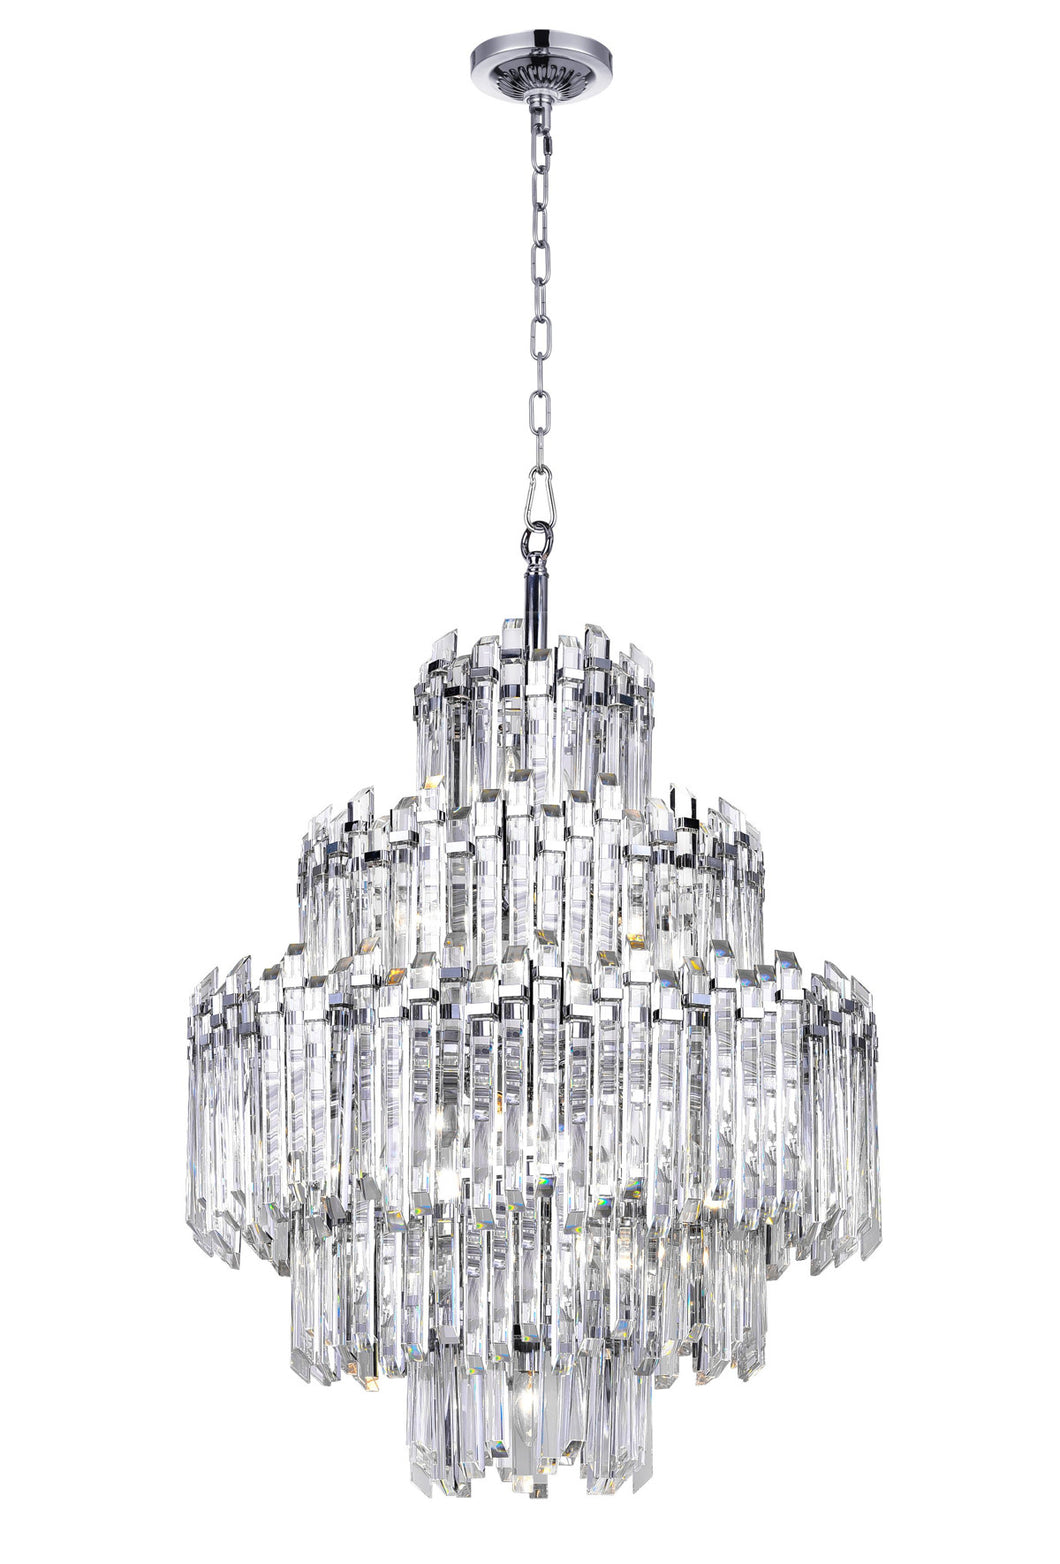 15 Light Chandelier with Chrome Finish